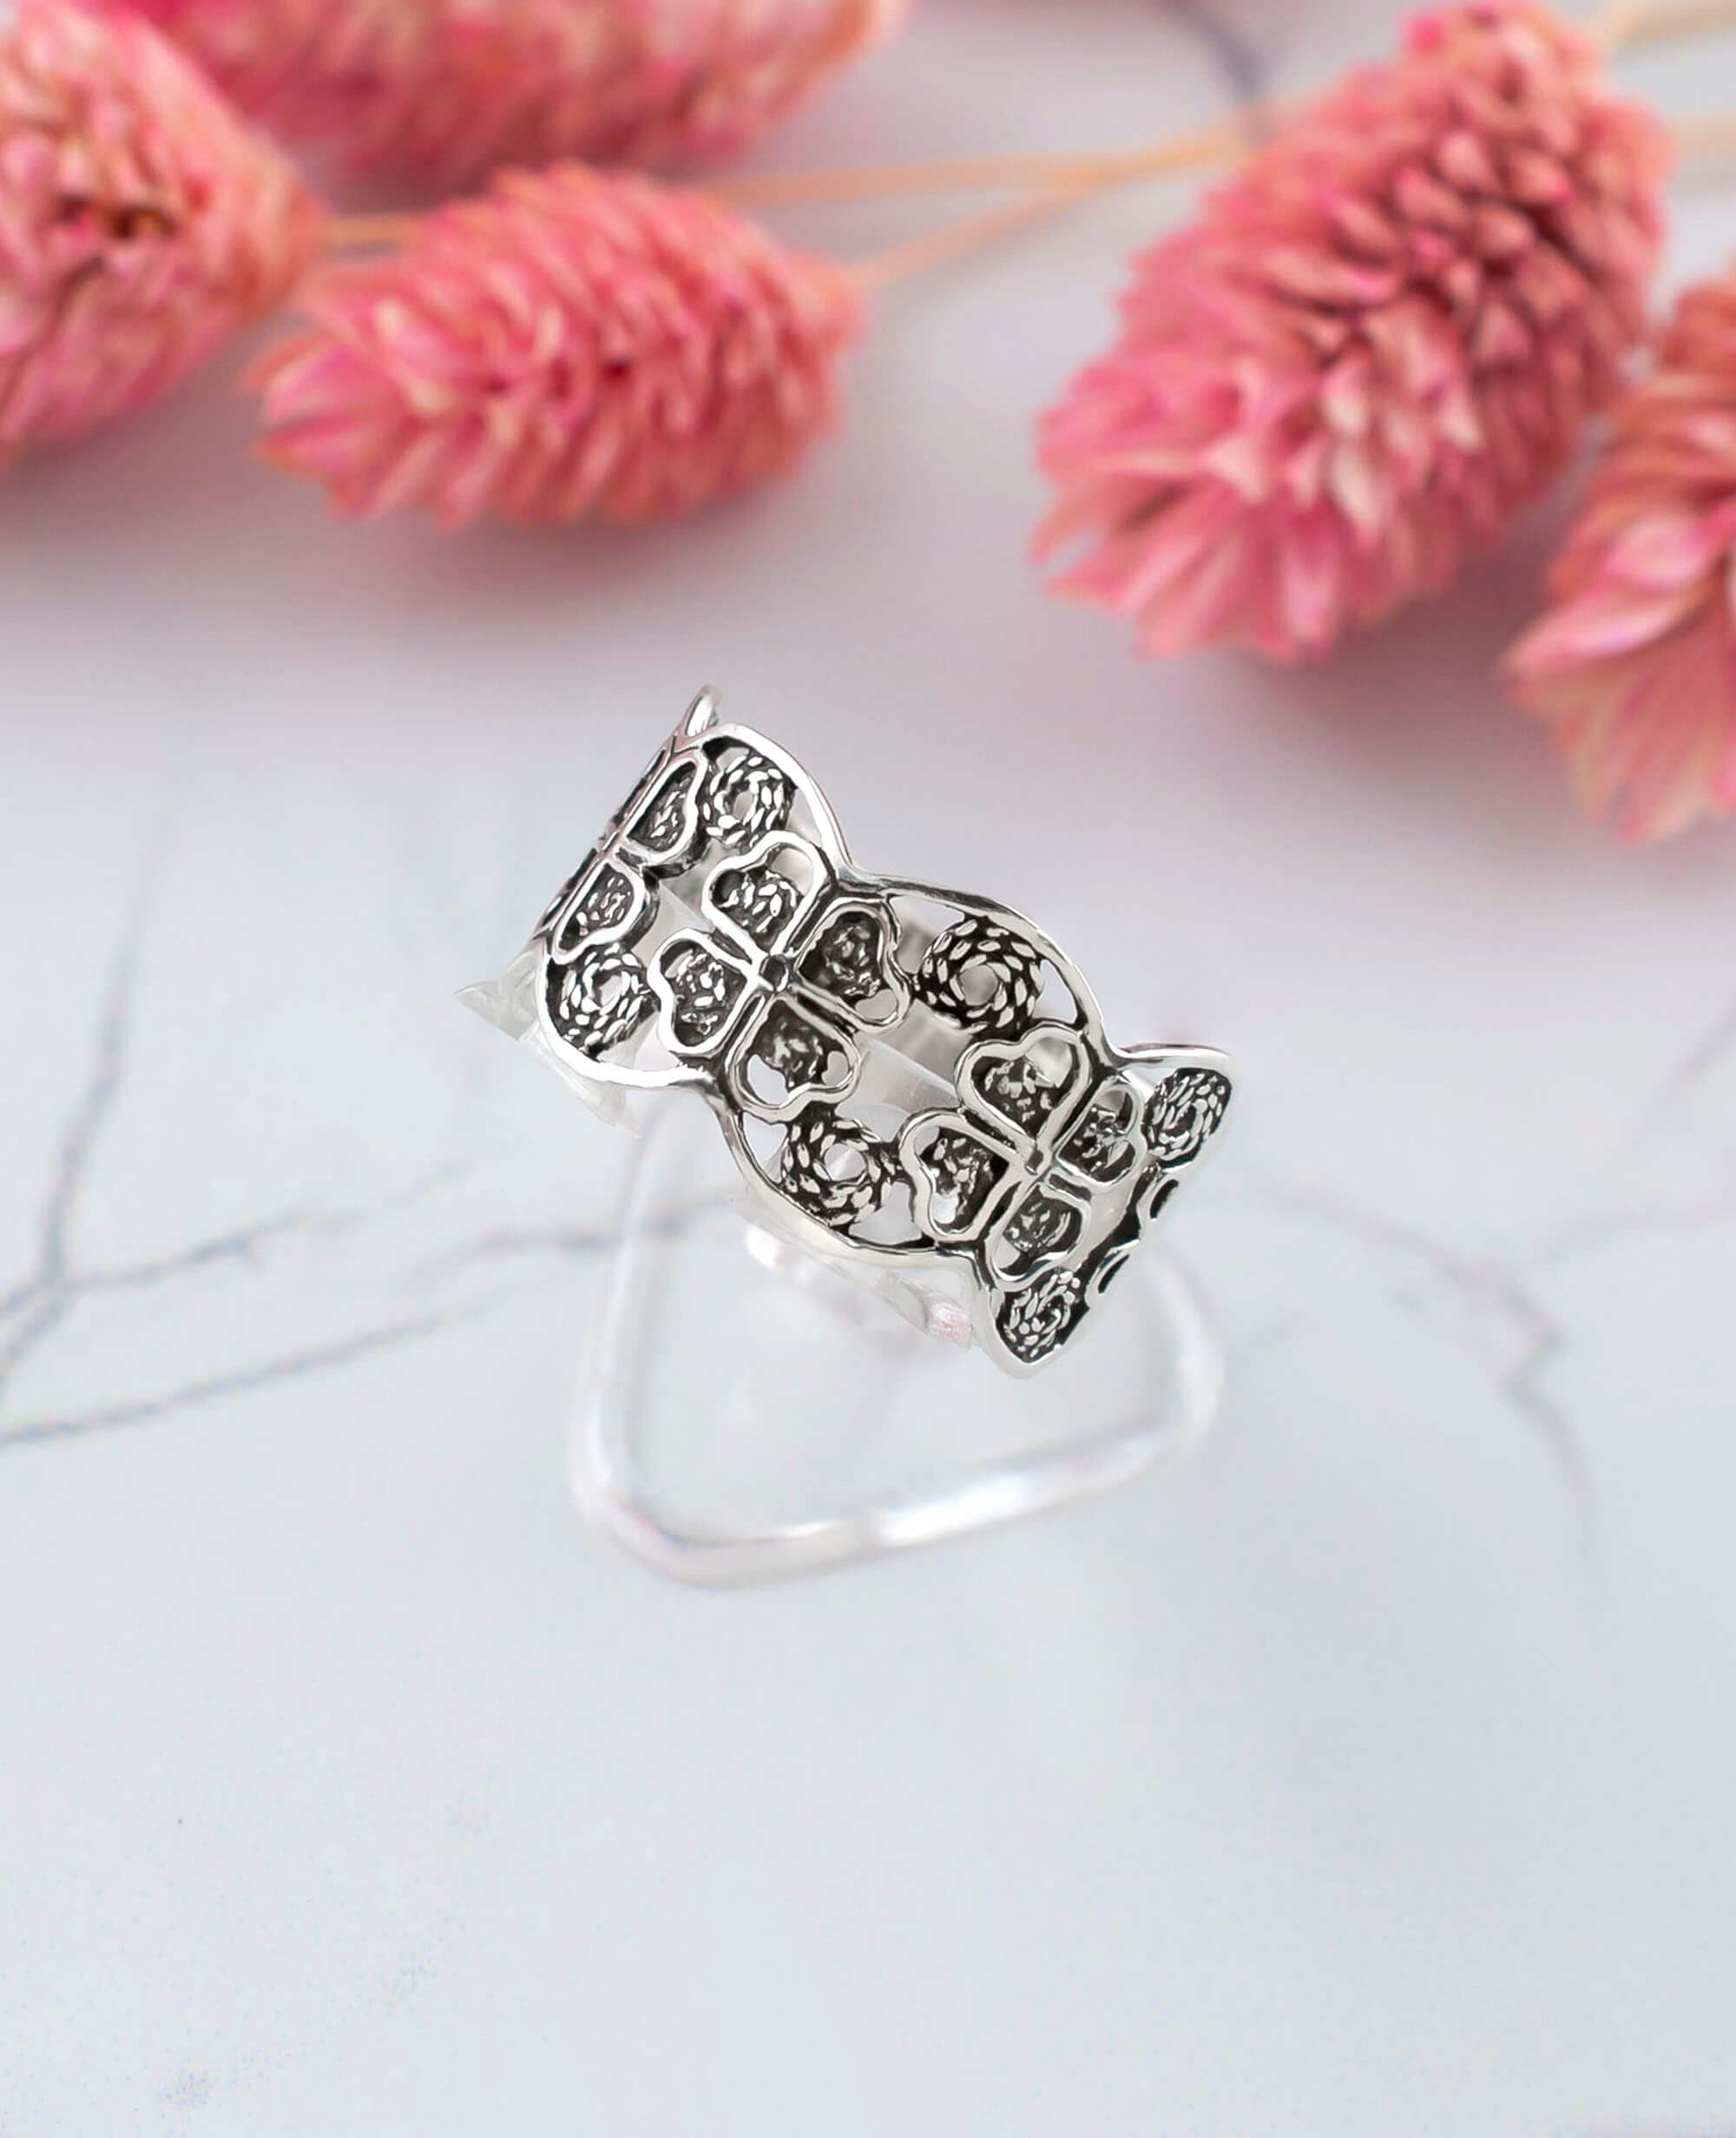 Silver Filigree Art Band Ring - 925 Sterling Silver, 0.39 Width, Mesopotamian-Inspired Design" - Jewelry & Watches - Bijou Her -  -  - 